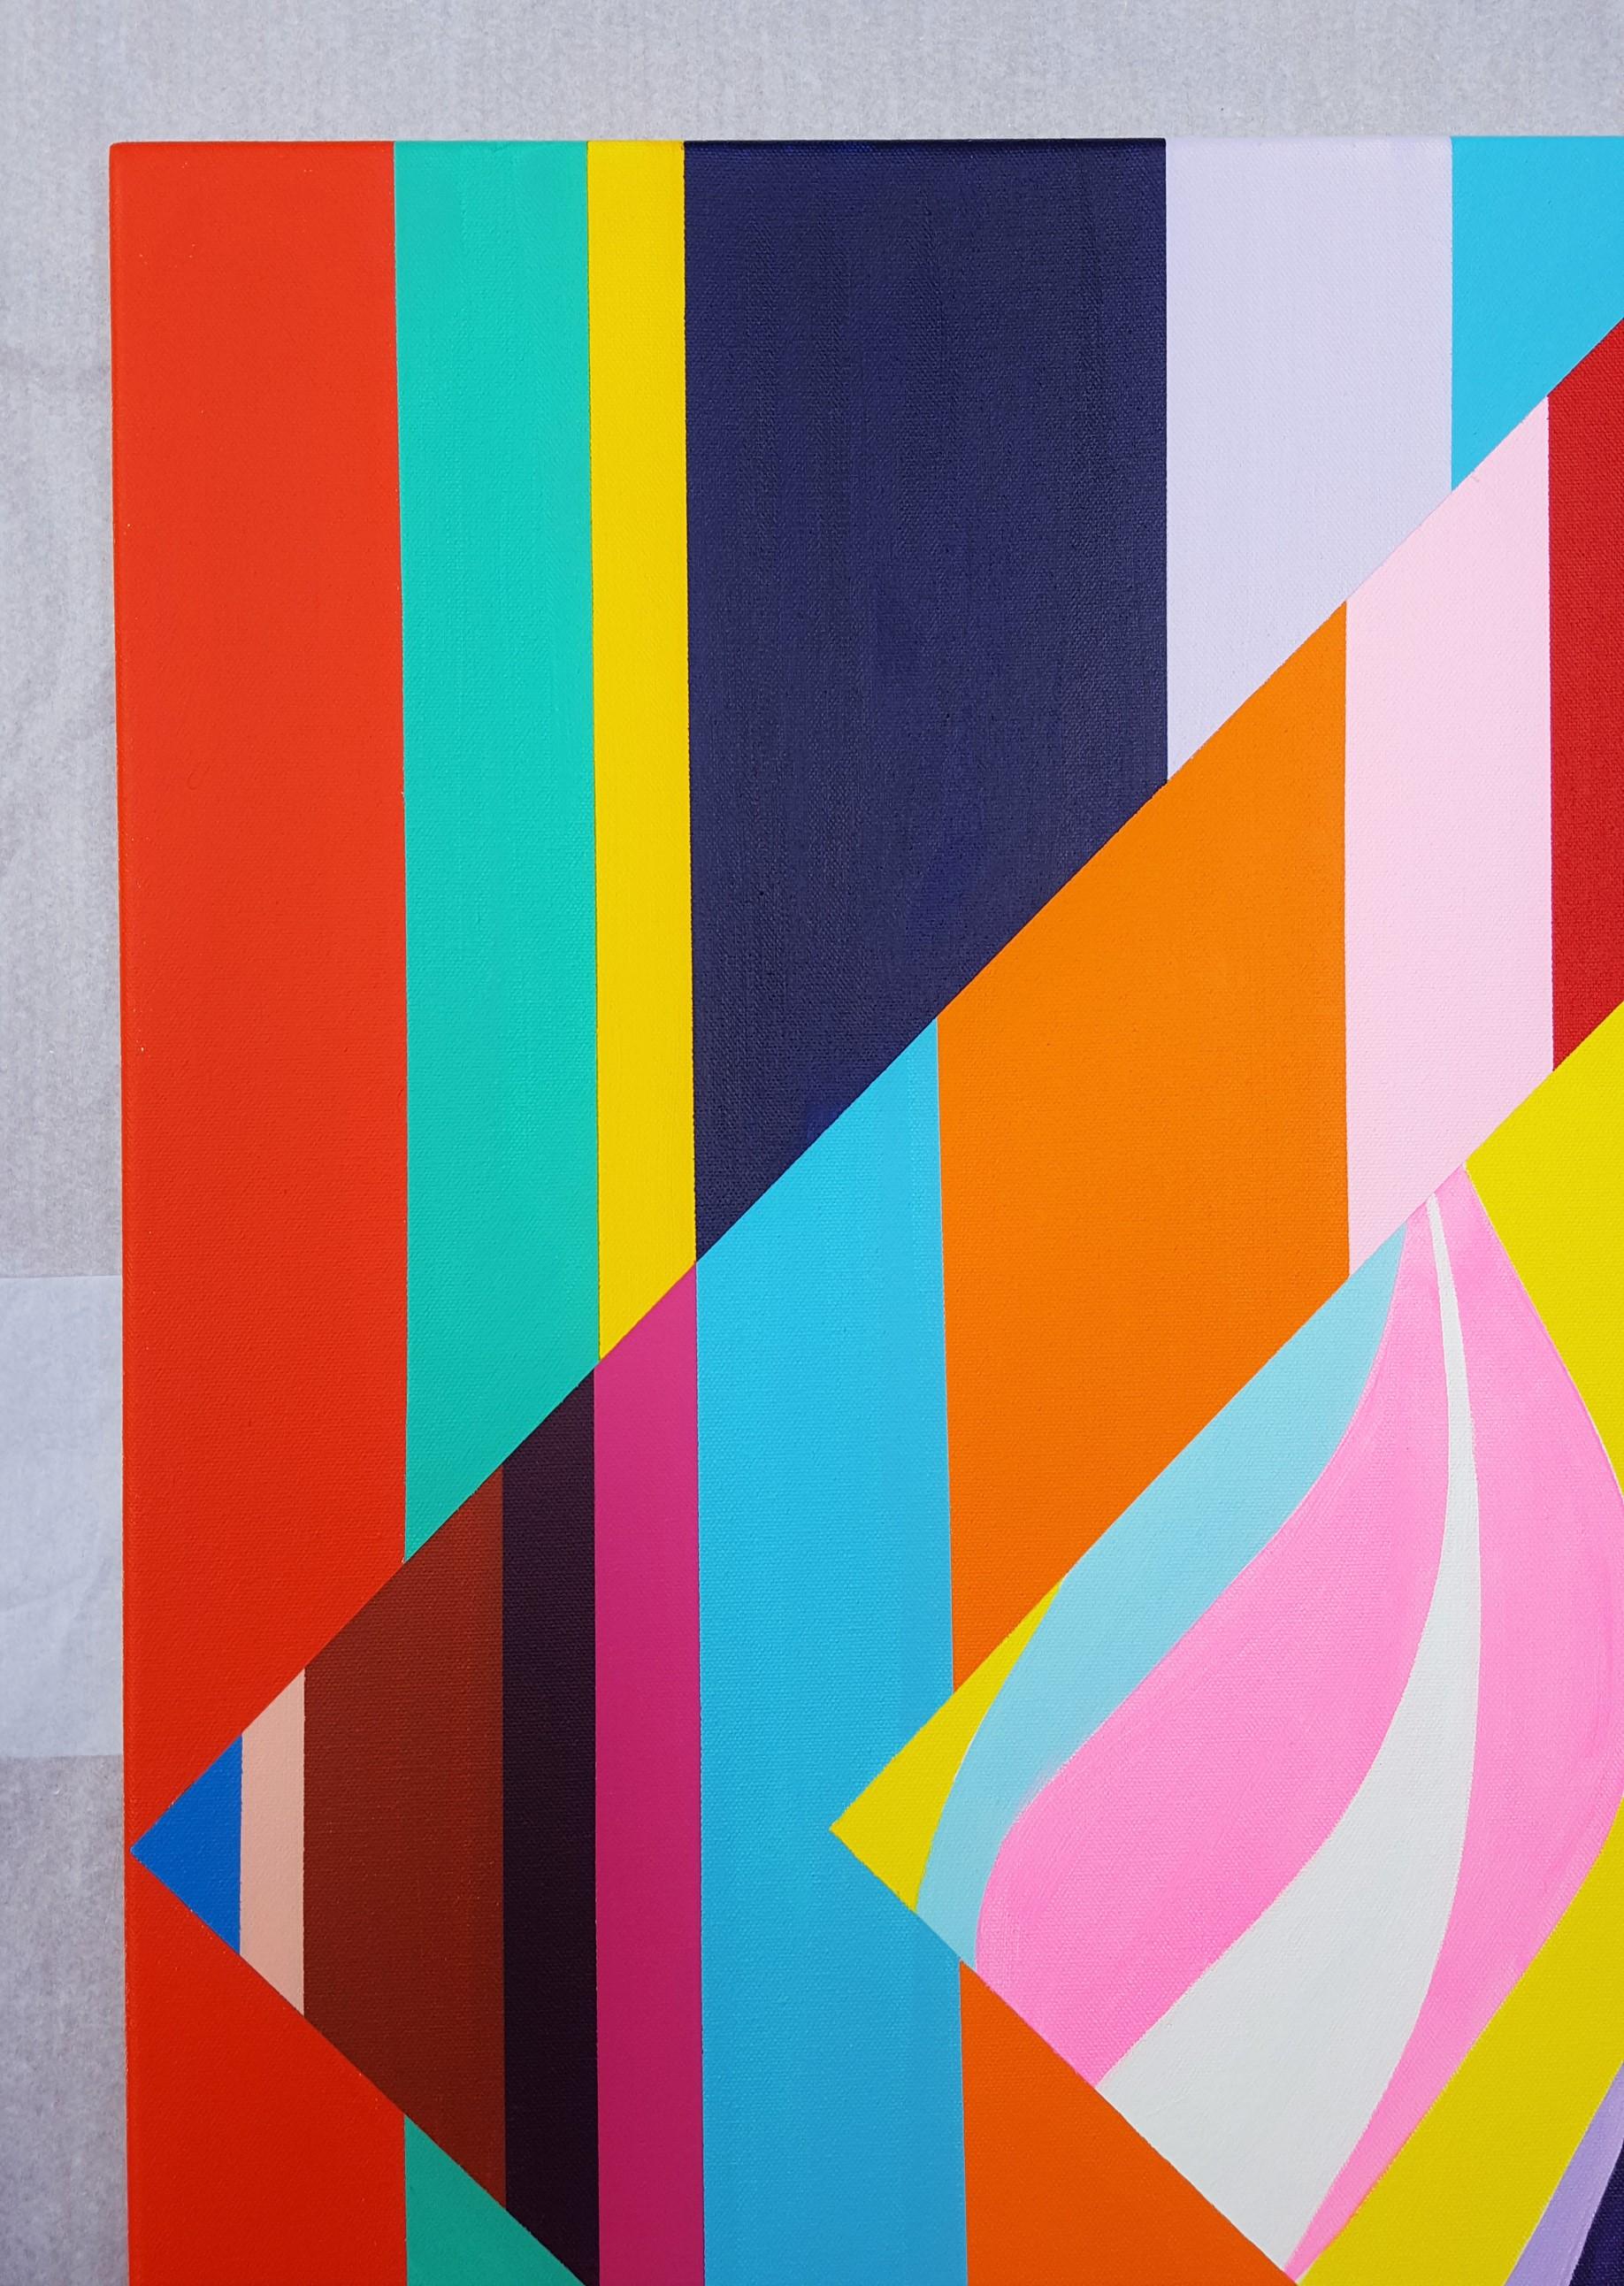 Diamant XXXV /// Contemporary Abstract Geometric Striped Pattern Colorful Art (Geometrische Abstraktion), Painting, von Jack Graves III